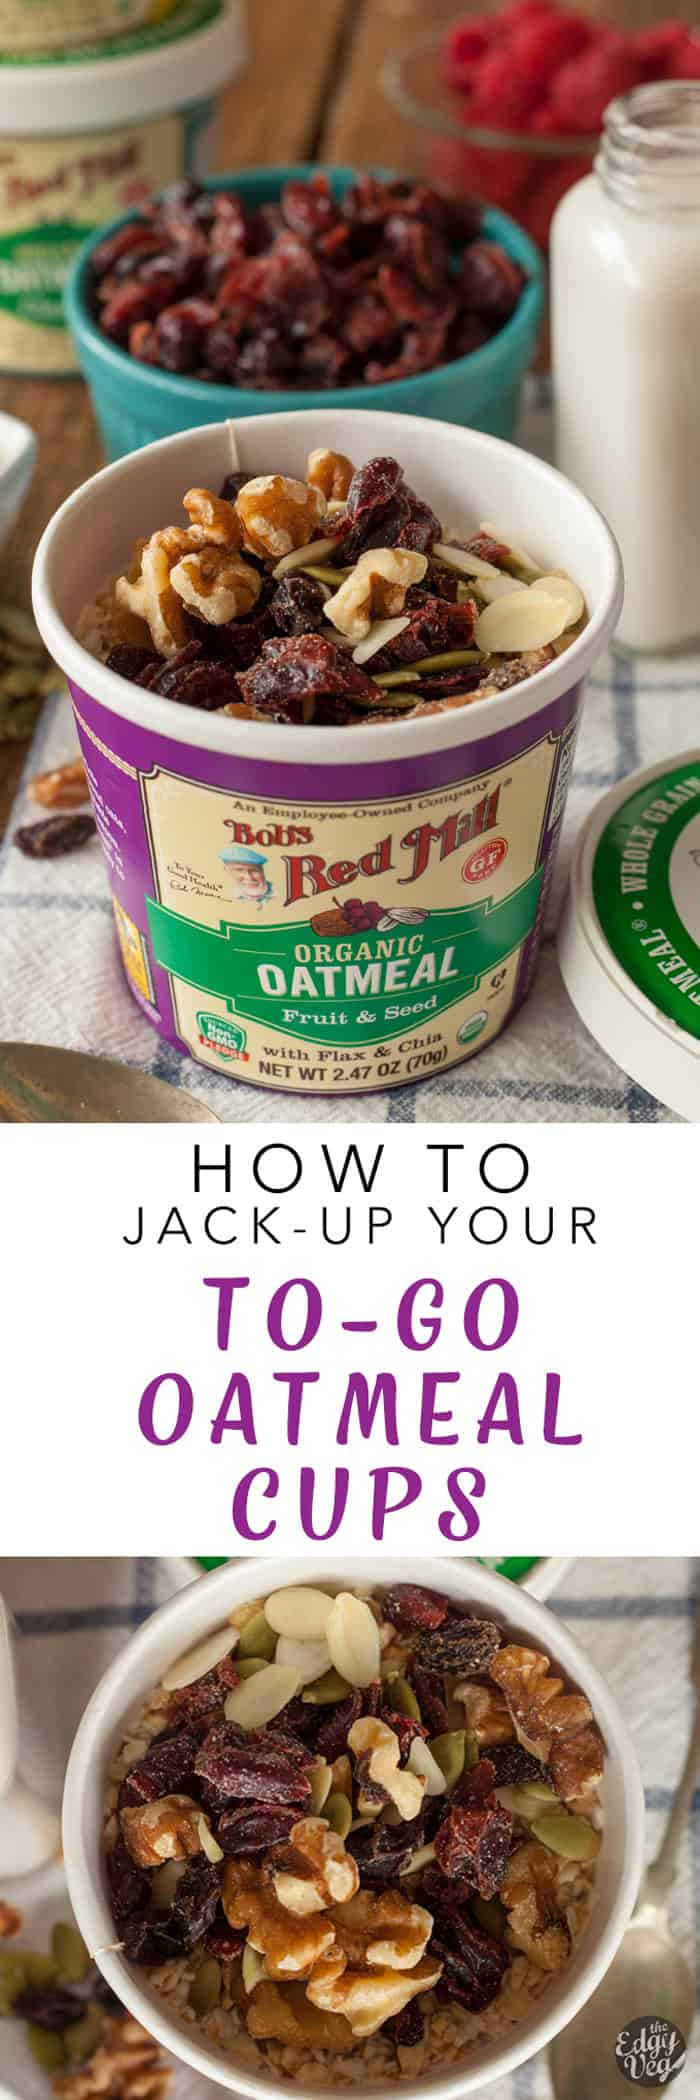 oatmeal to go cups